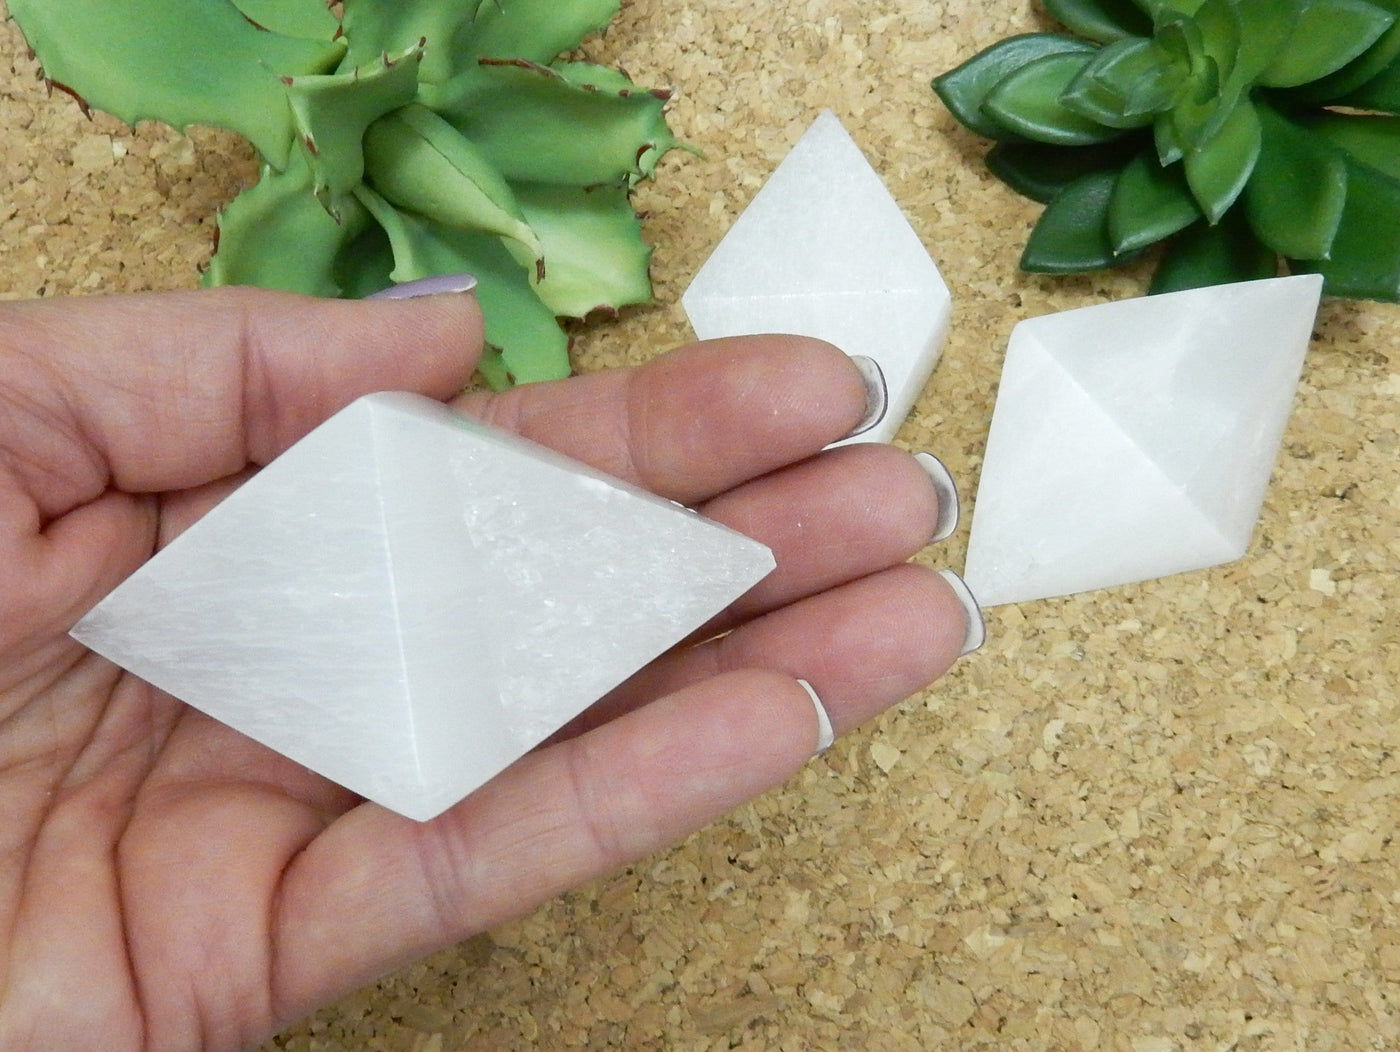 selenite double pyramid in hand for size reference with others in background